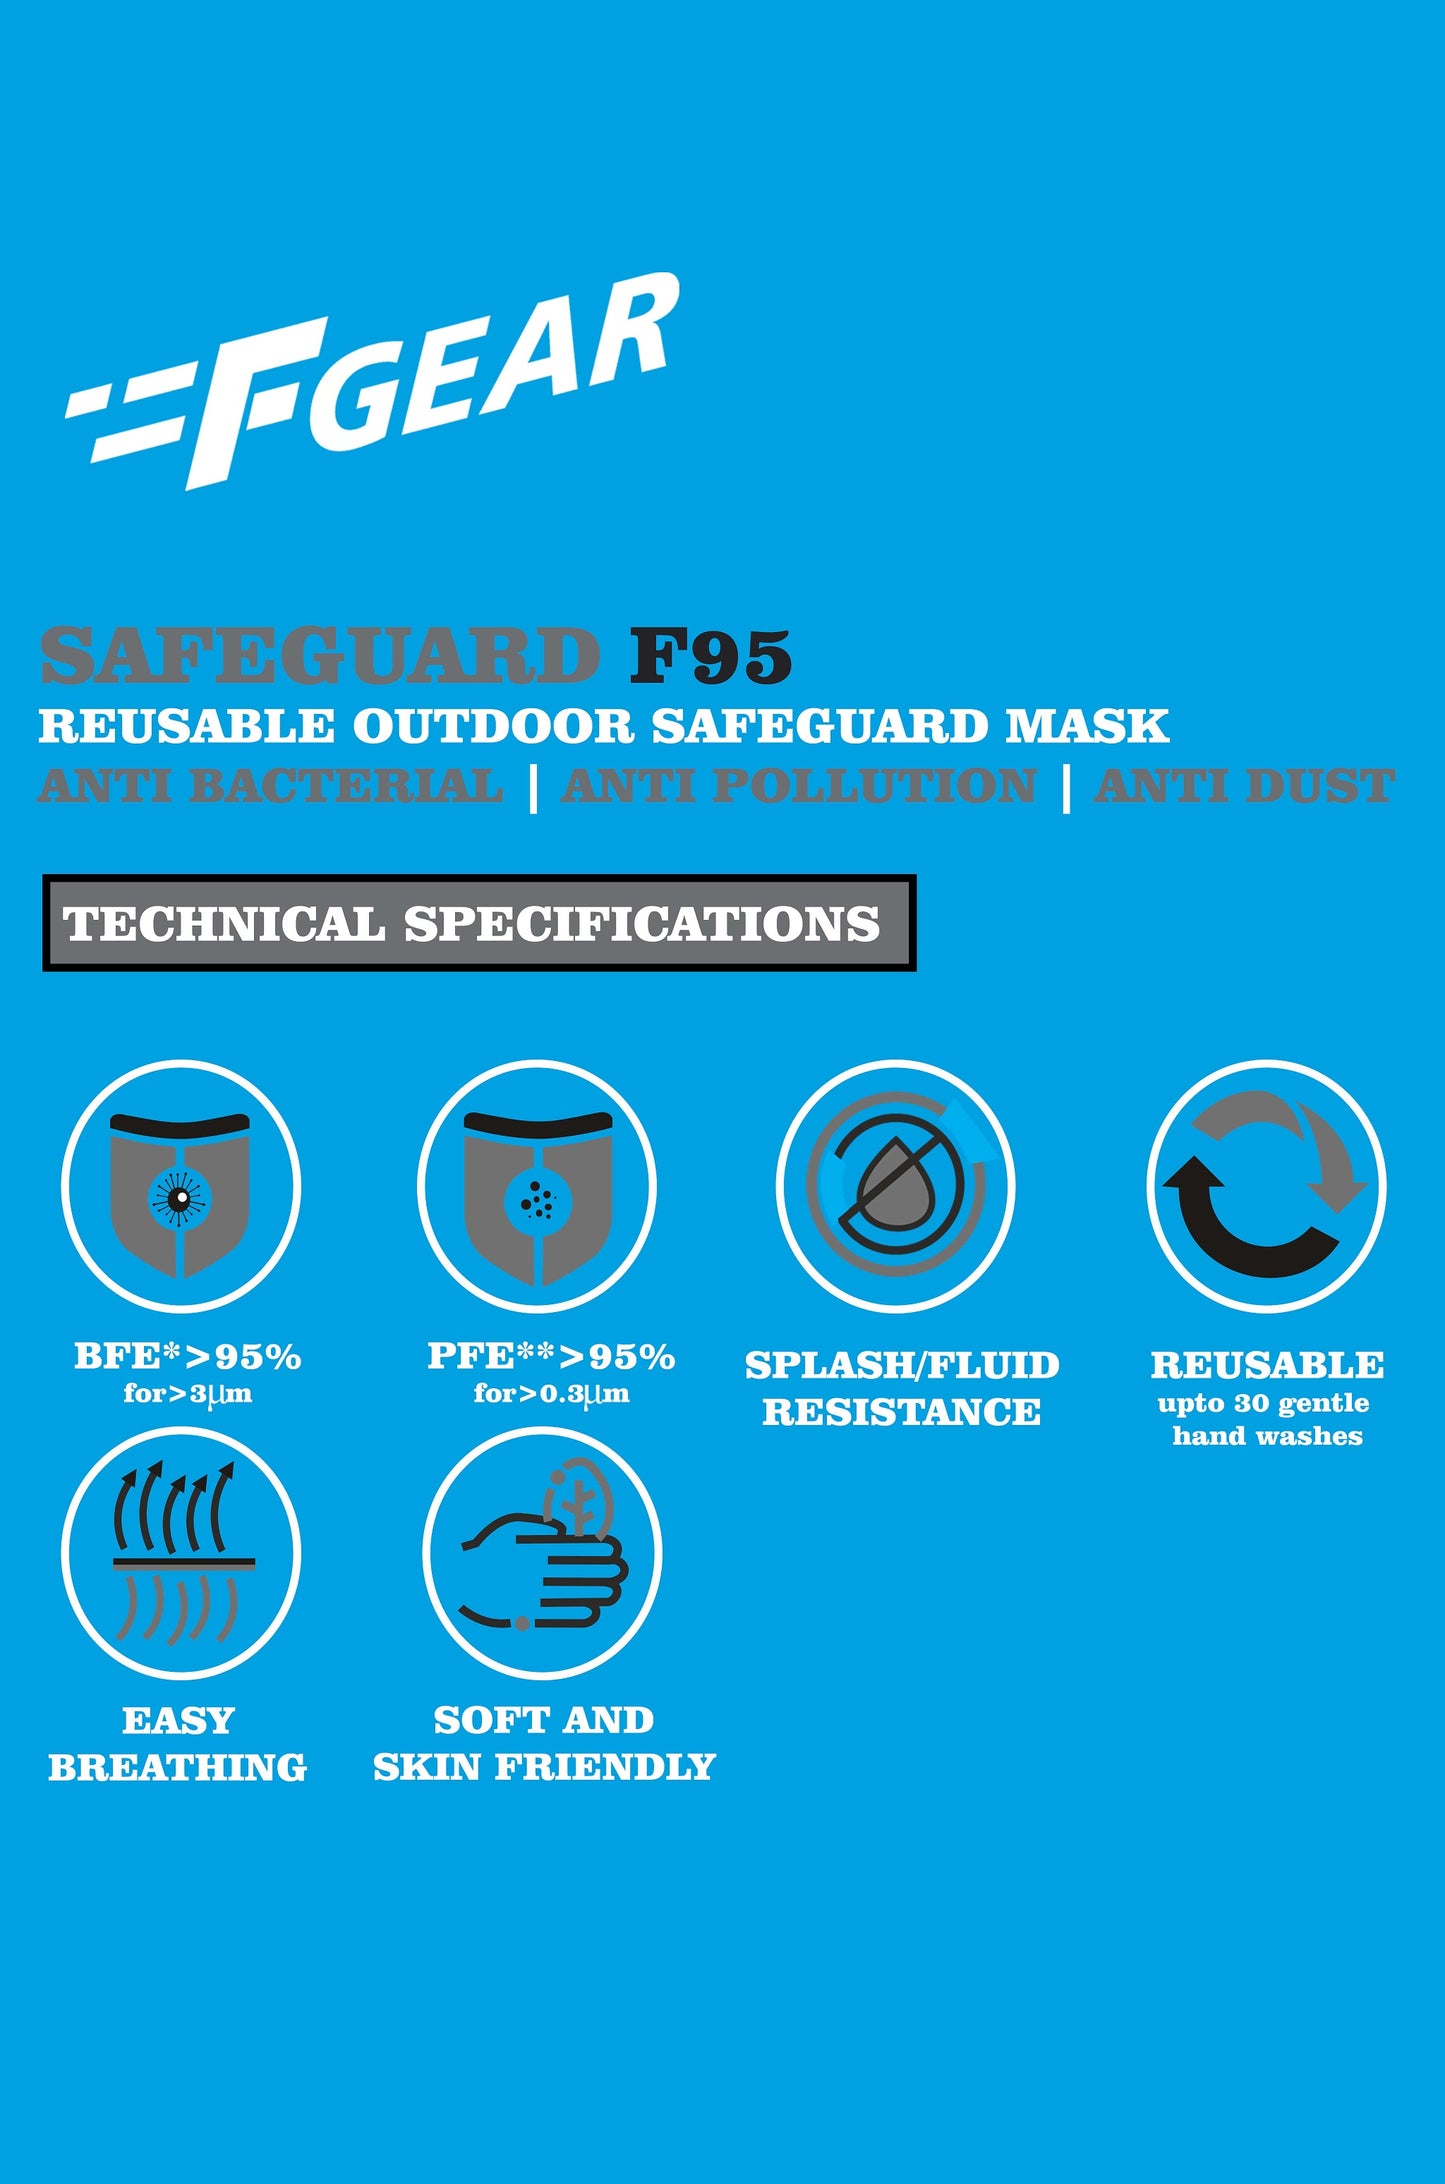 F Gear Safeguard F95 Outdoor Mask (Pack of 7)